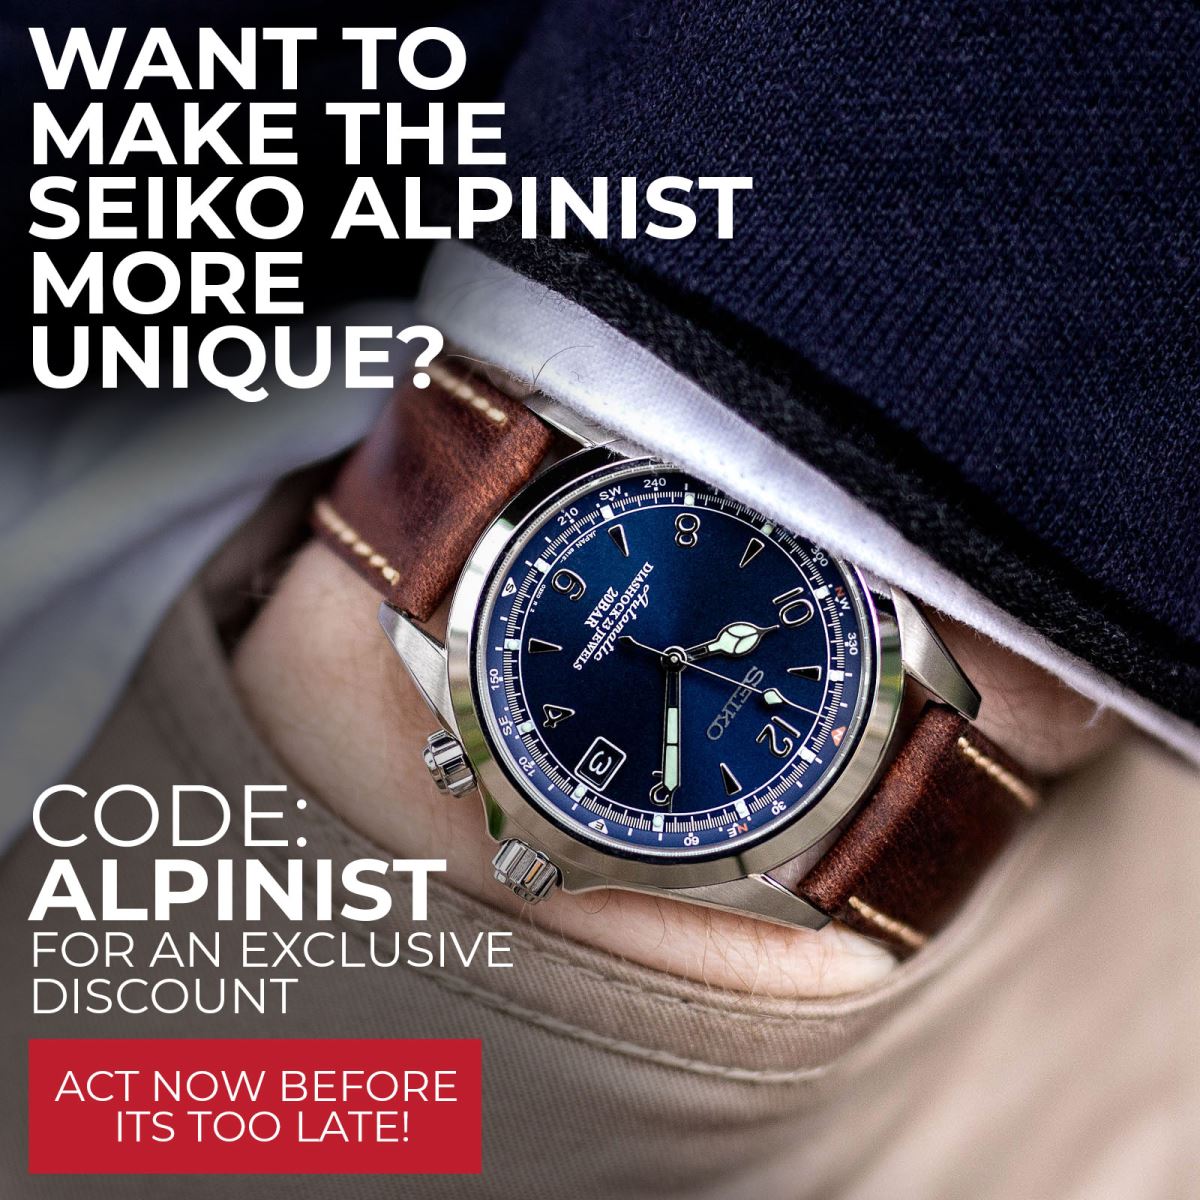 The NEW Seiko Alpinist EVERYONE Wants! 